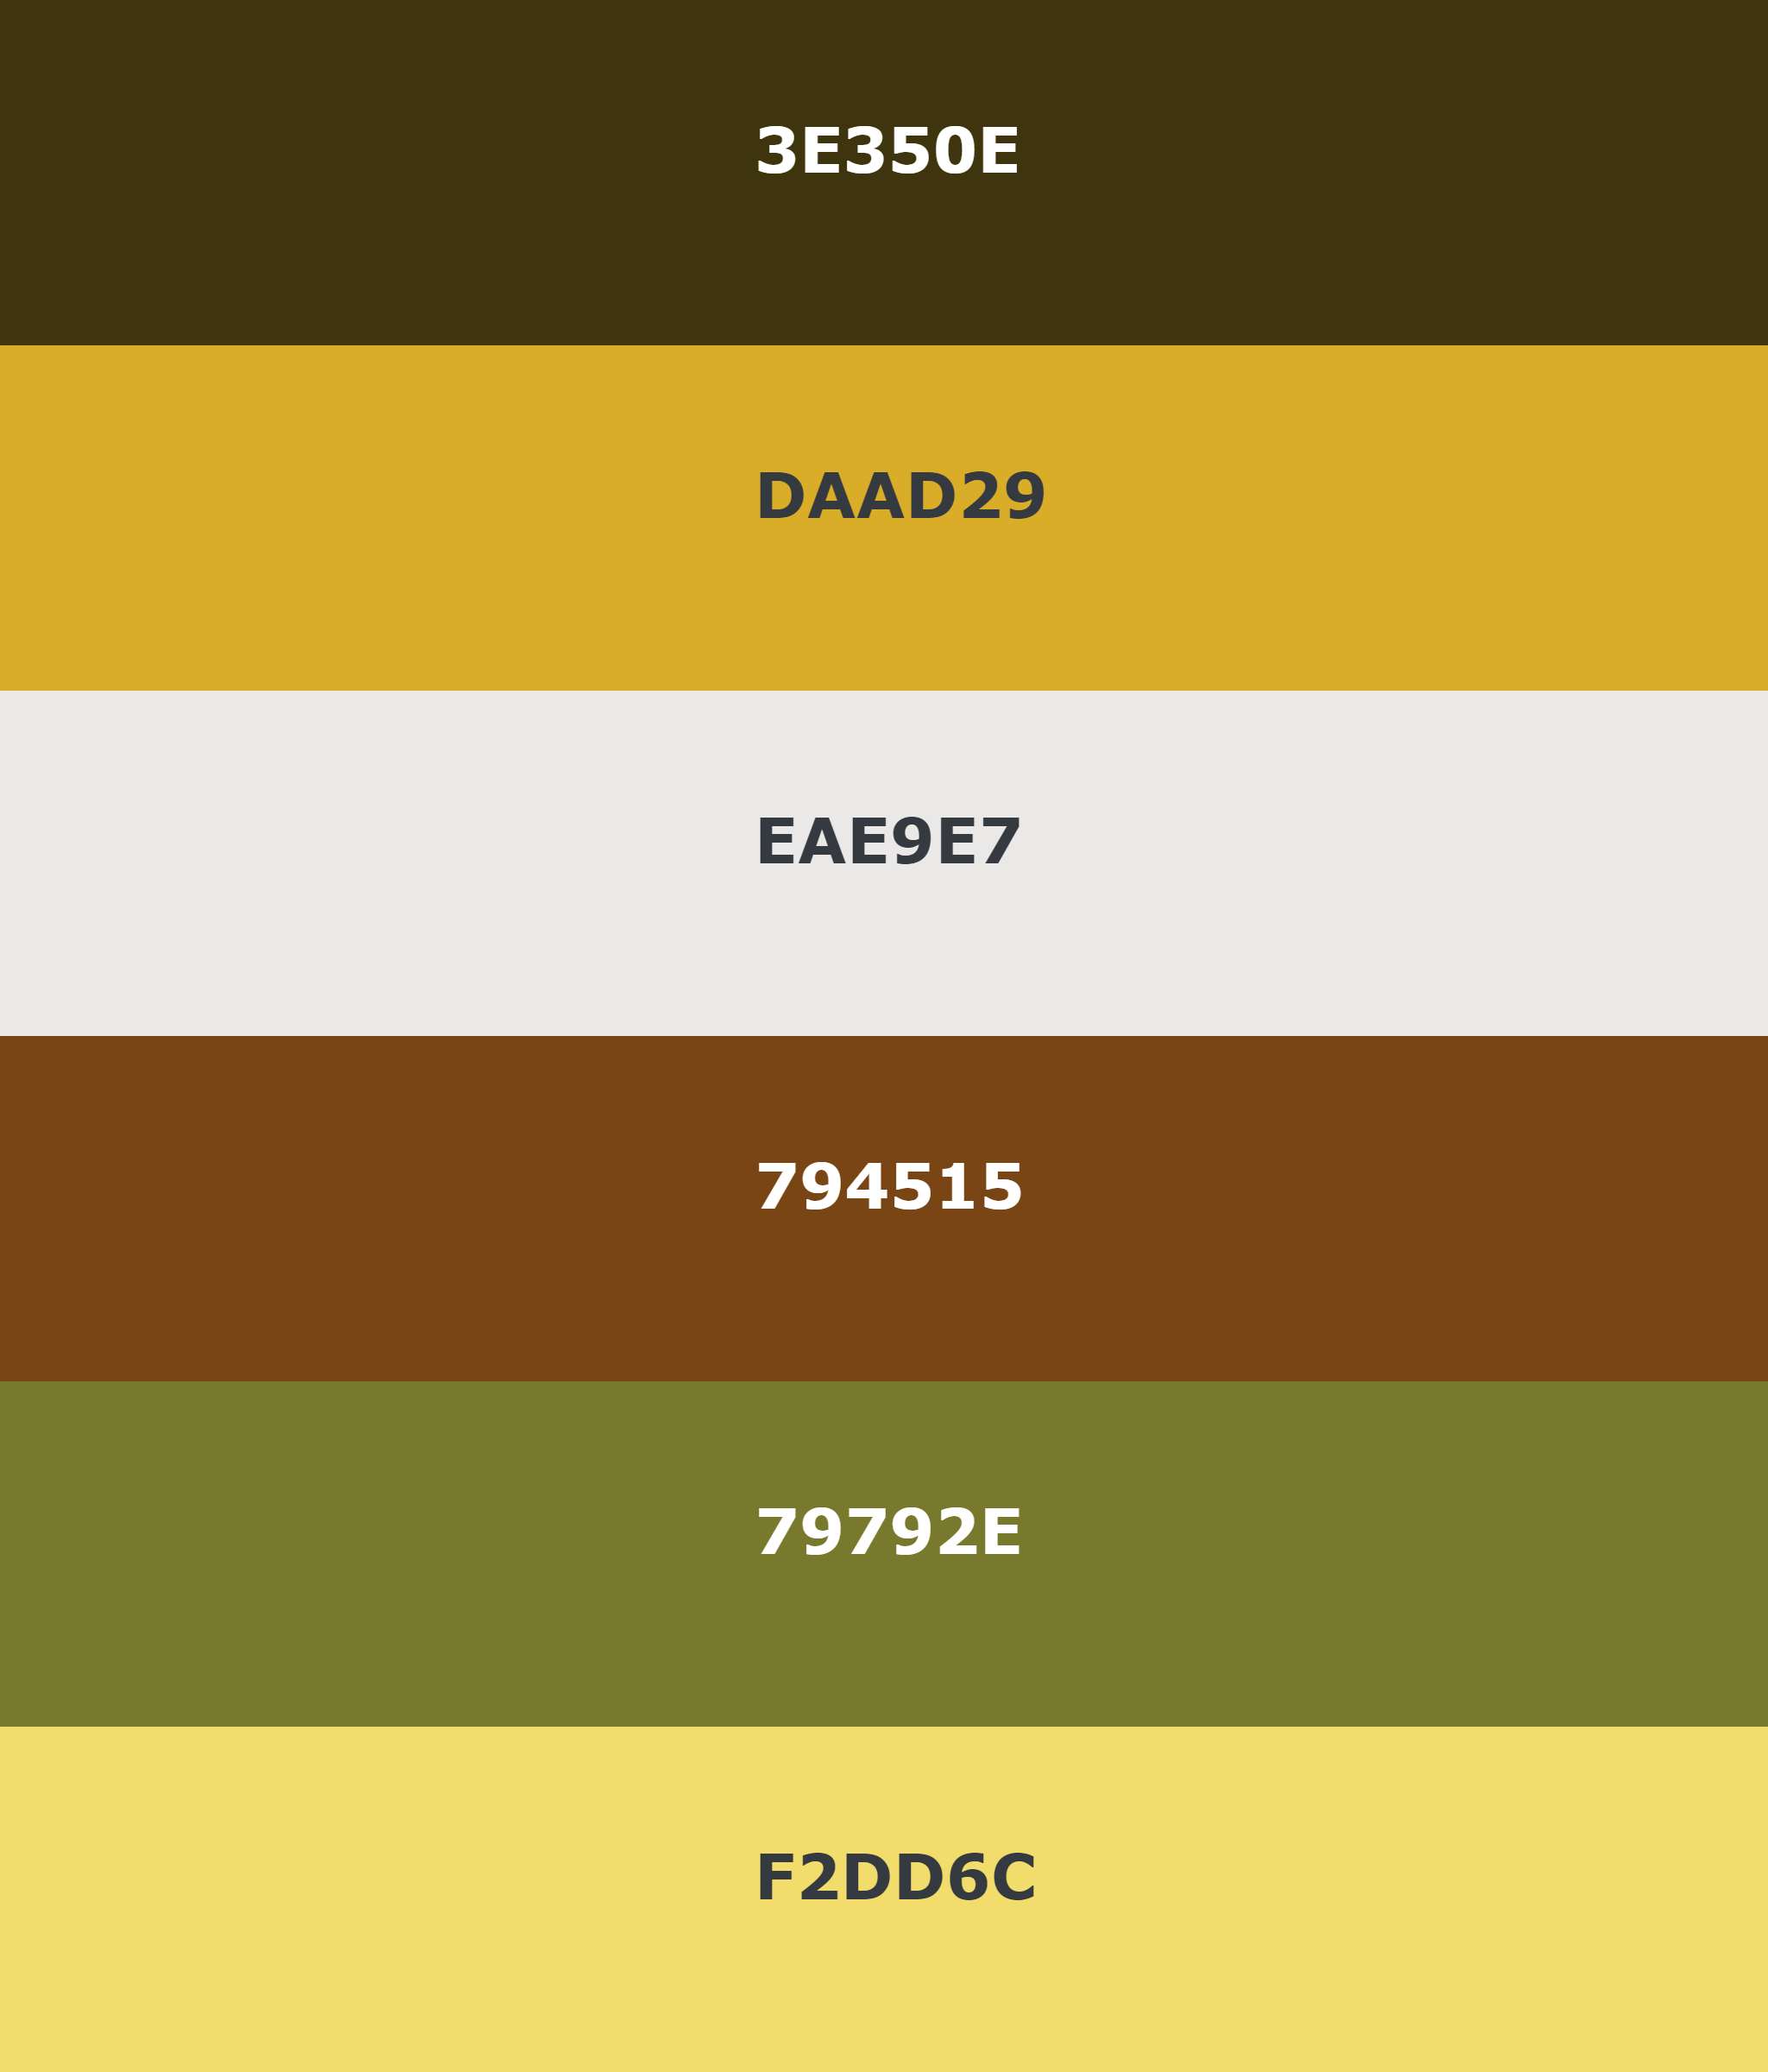 Color palette from image